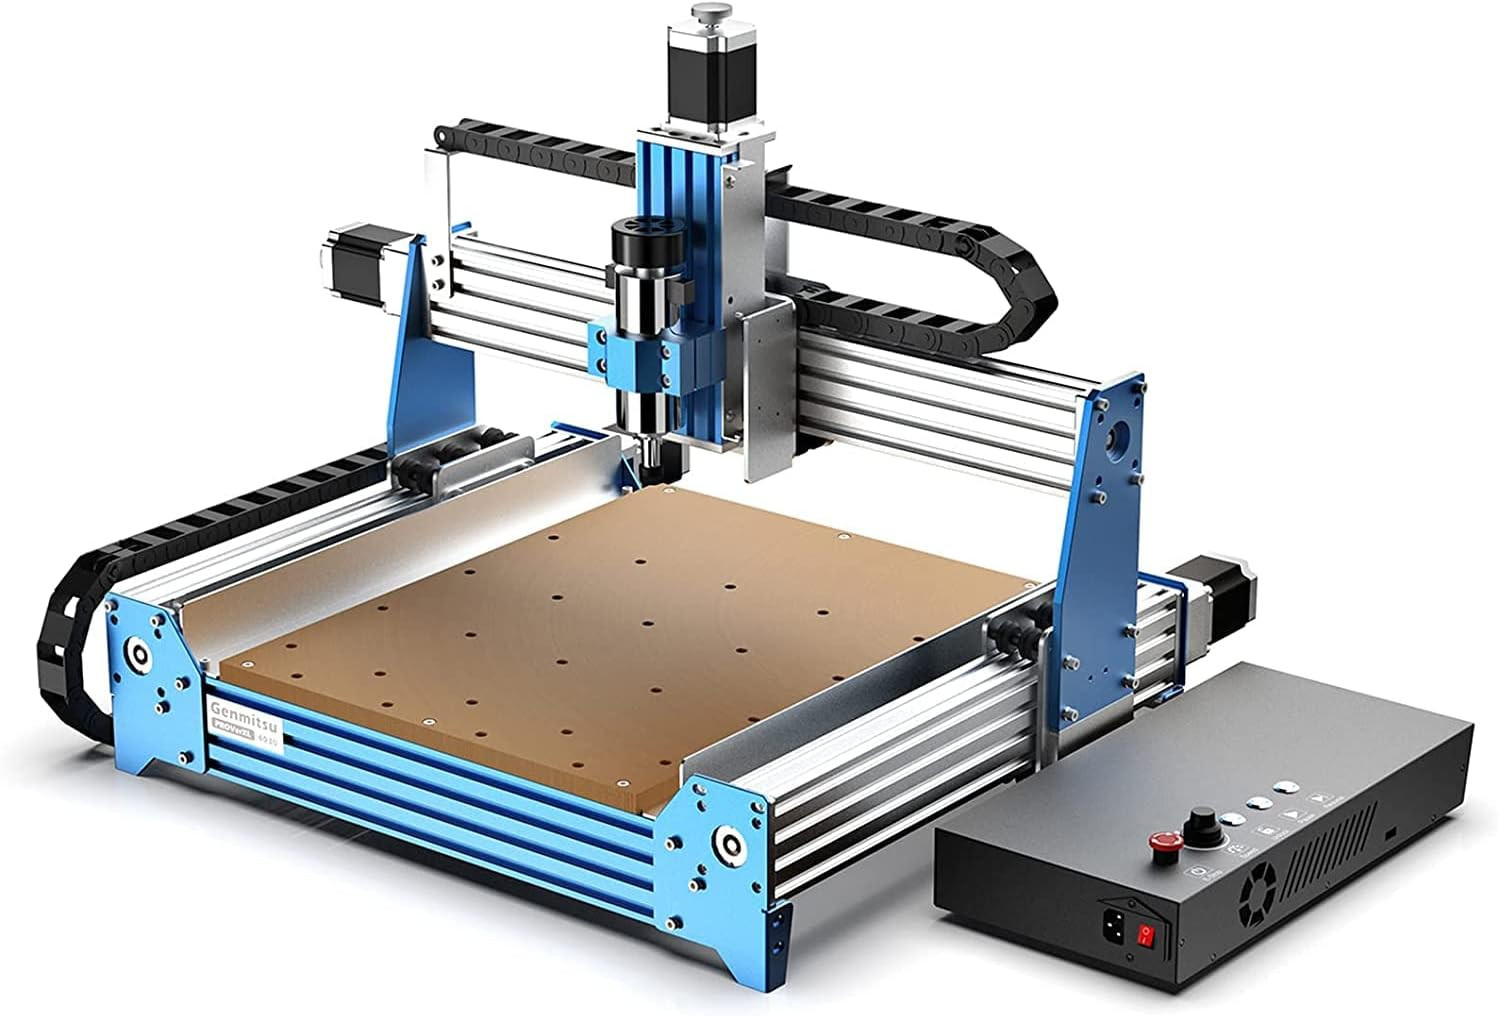 Genmitsu CNC Router Machine PROVerXL 4030 for Wood Metal Acrylic MDF Carving Arts Crafts DIY Design, 3 Axis Milling Cutting Engraving Machine, AU Plug